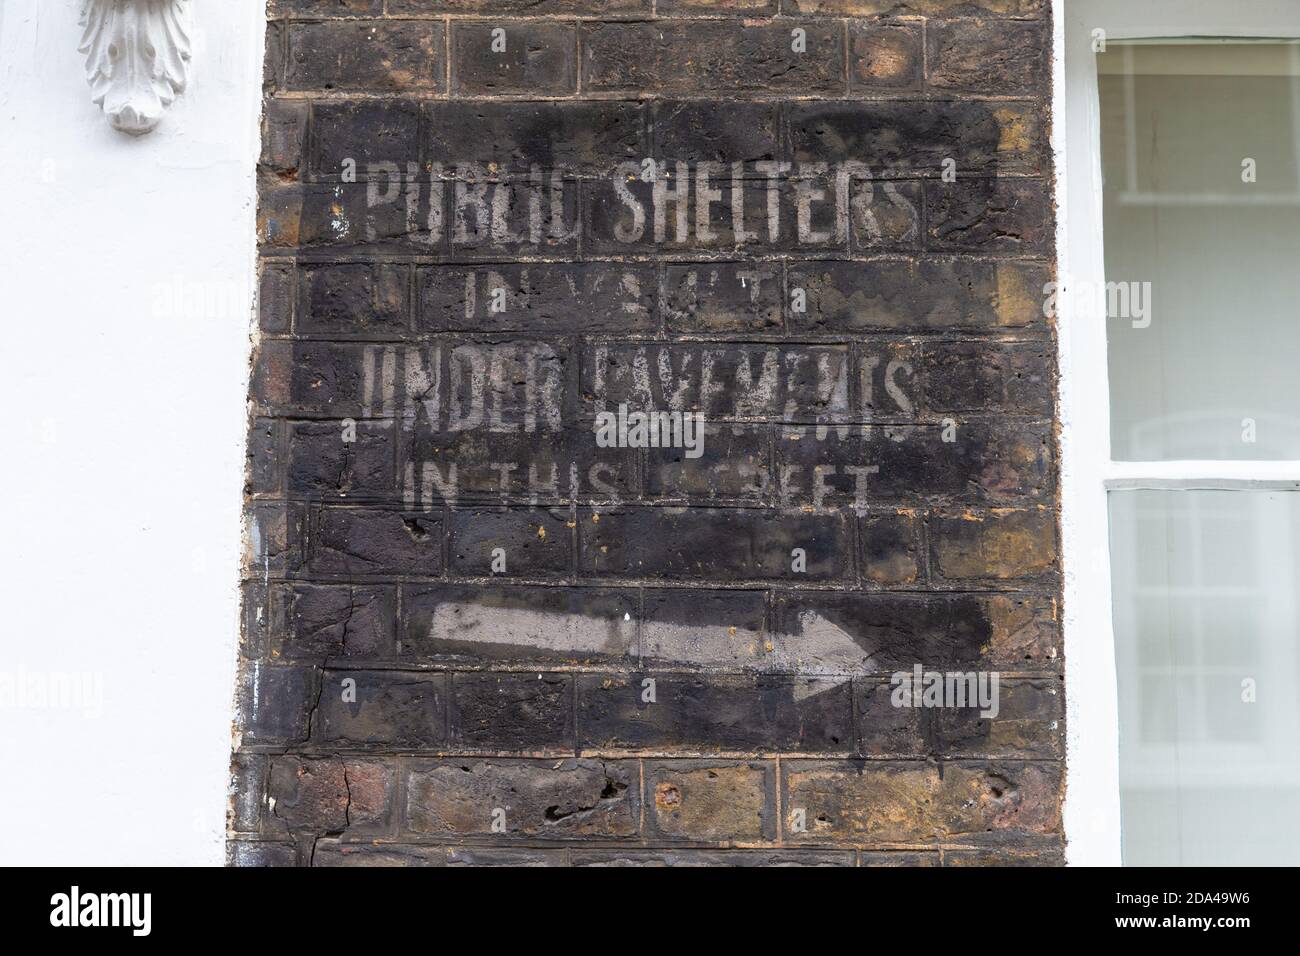 Public shelters in vault under pavements in this street, ghost sign on wall, london street, uk Stock Photo